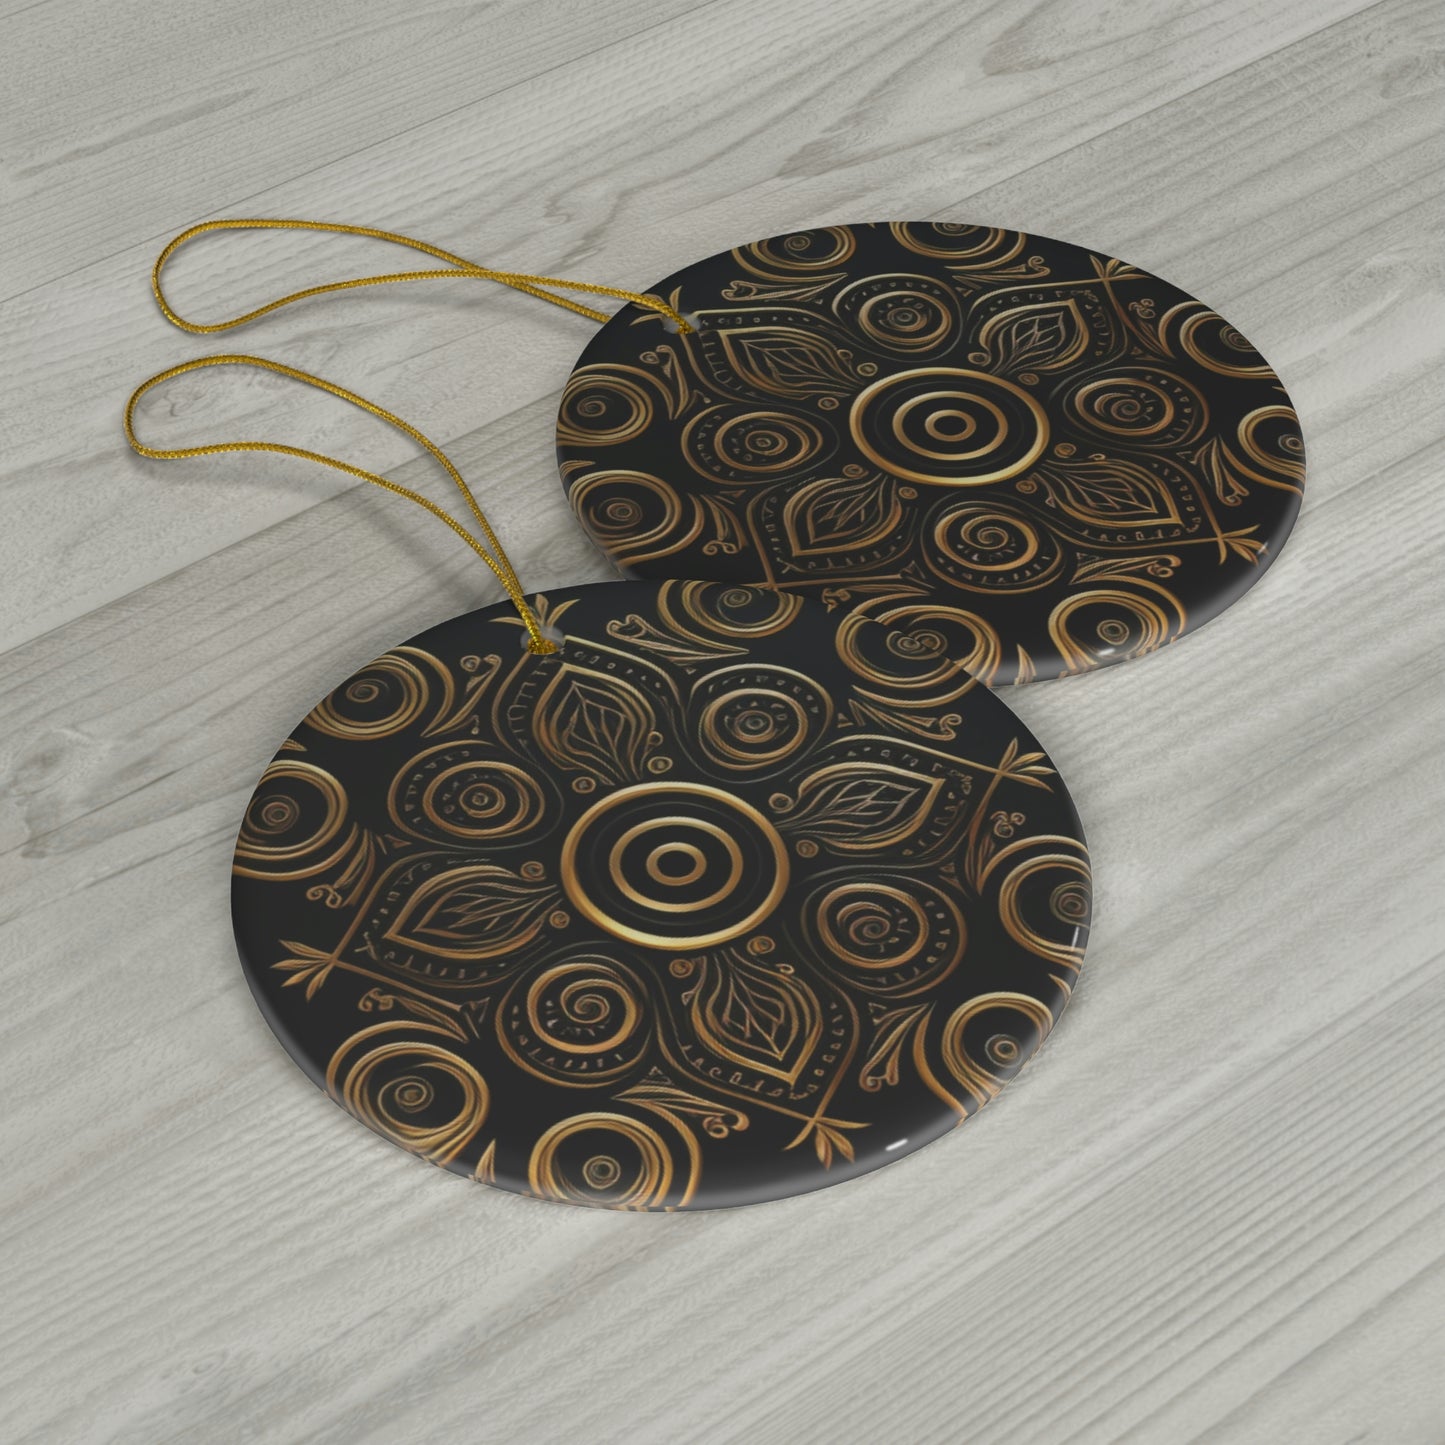 Black and Gold Circles and Diamonds Ceramic Ornament, 1-Pack